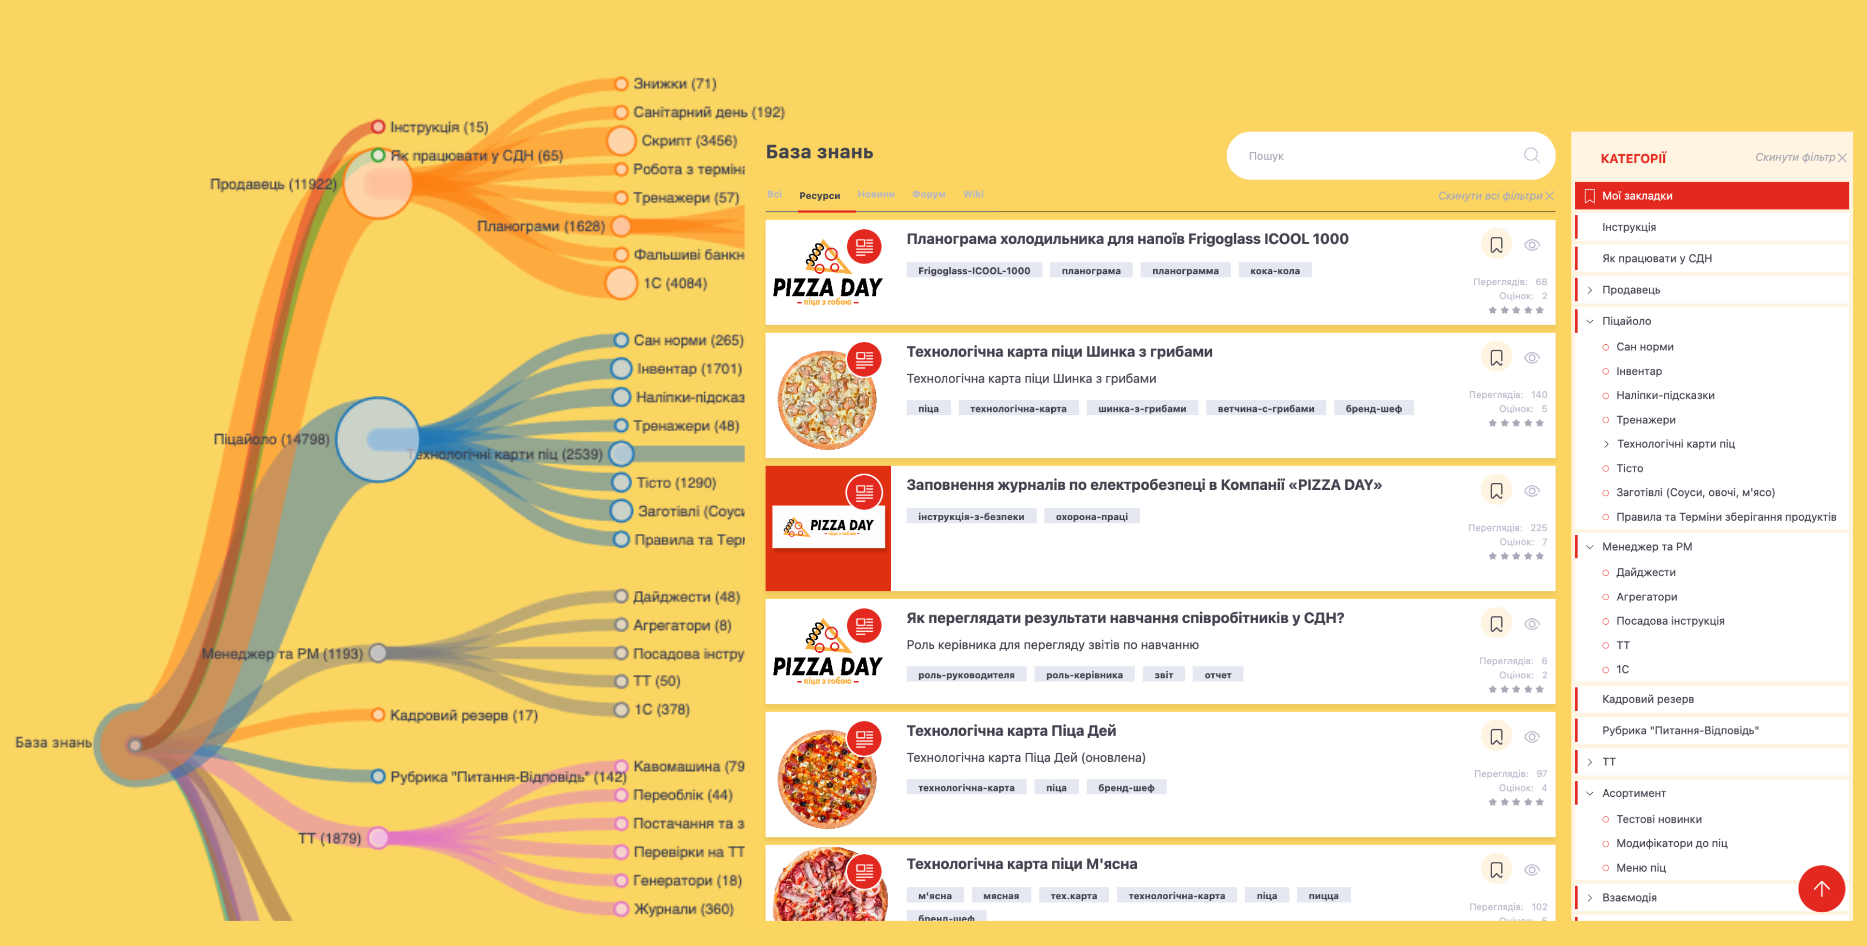 Corporate knowledge base "Pizza Day"